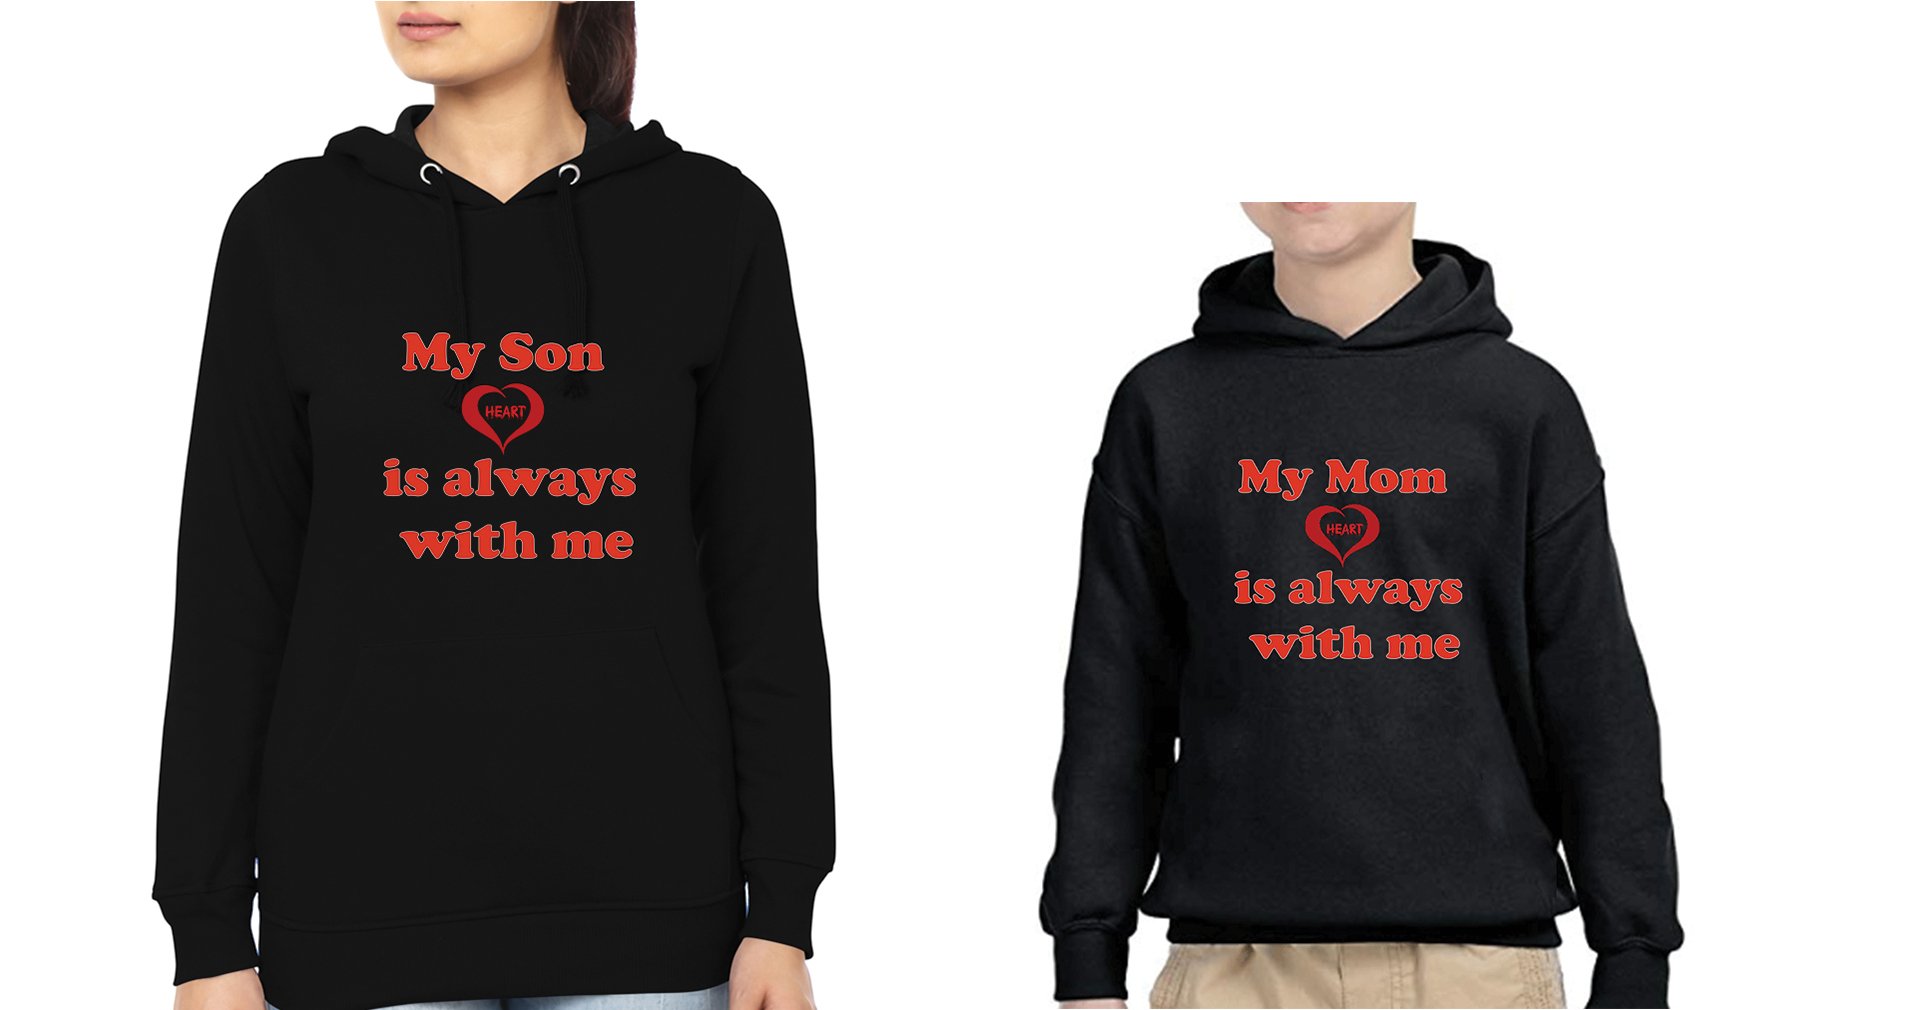 My Son Heart Is Always With Me My Mother Heart is Always With Me Mother and Son Matching Hoodies- FunkyTradition